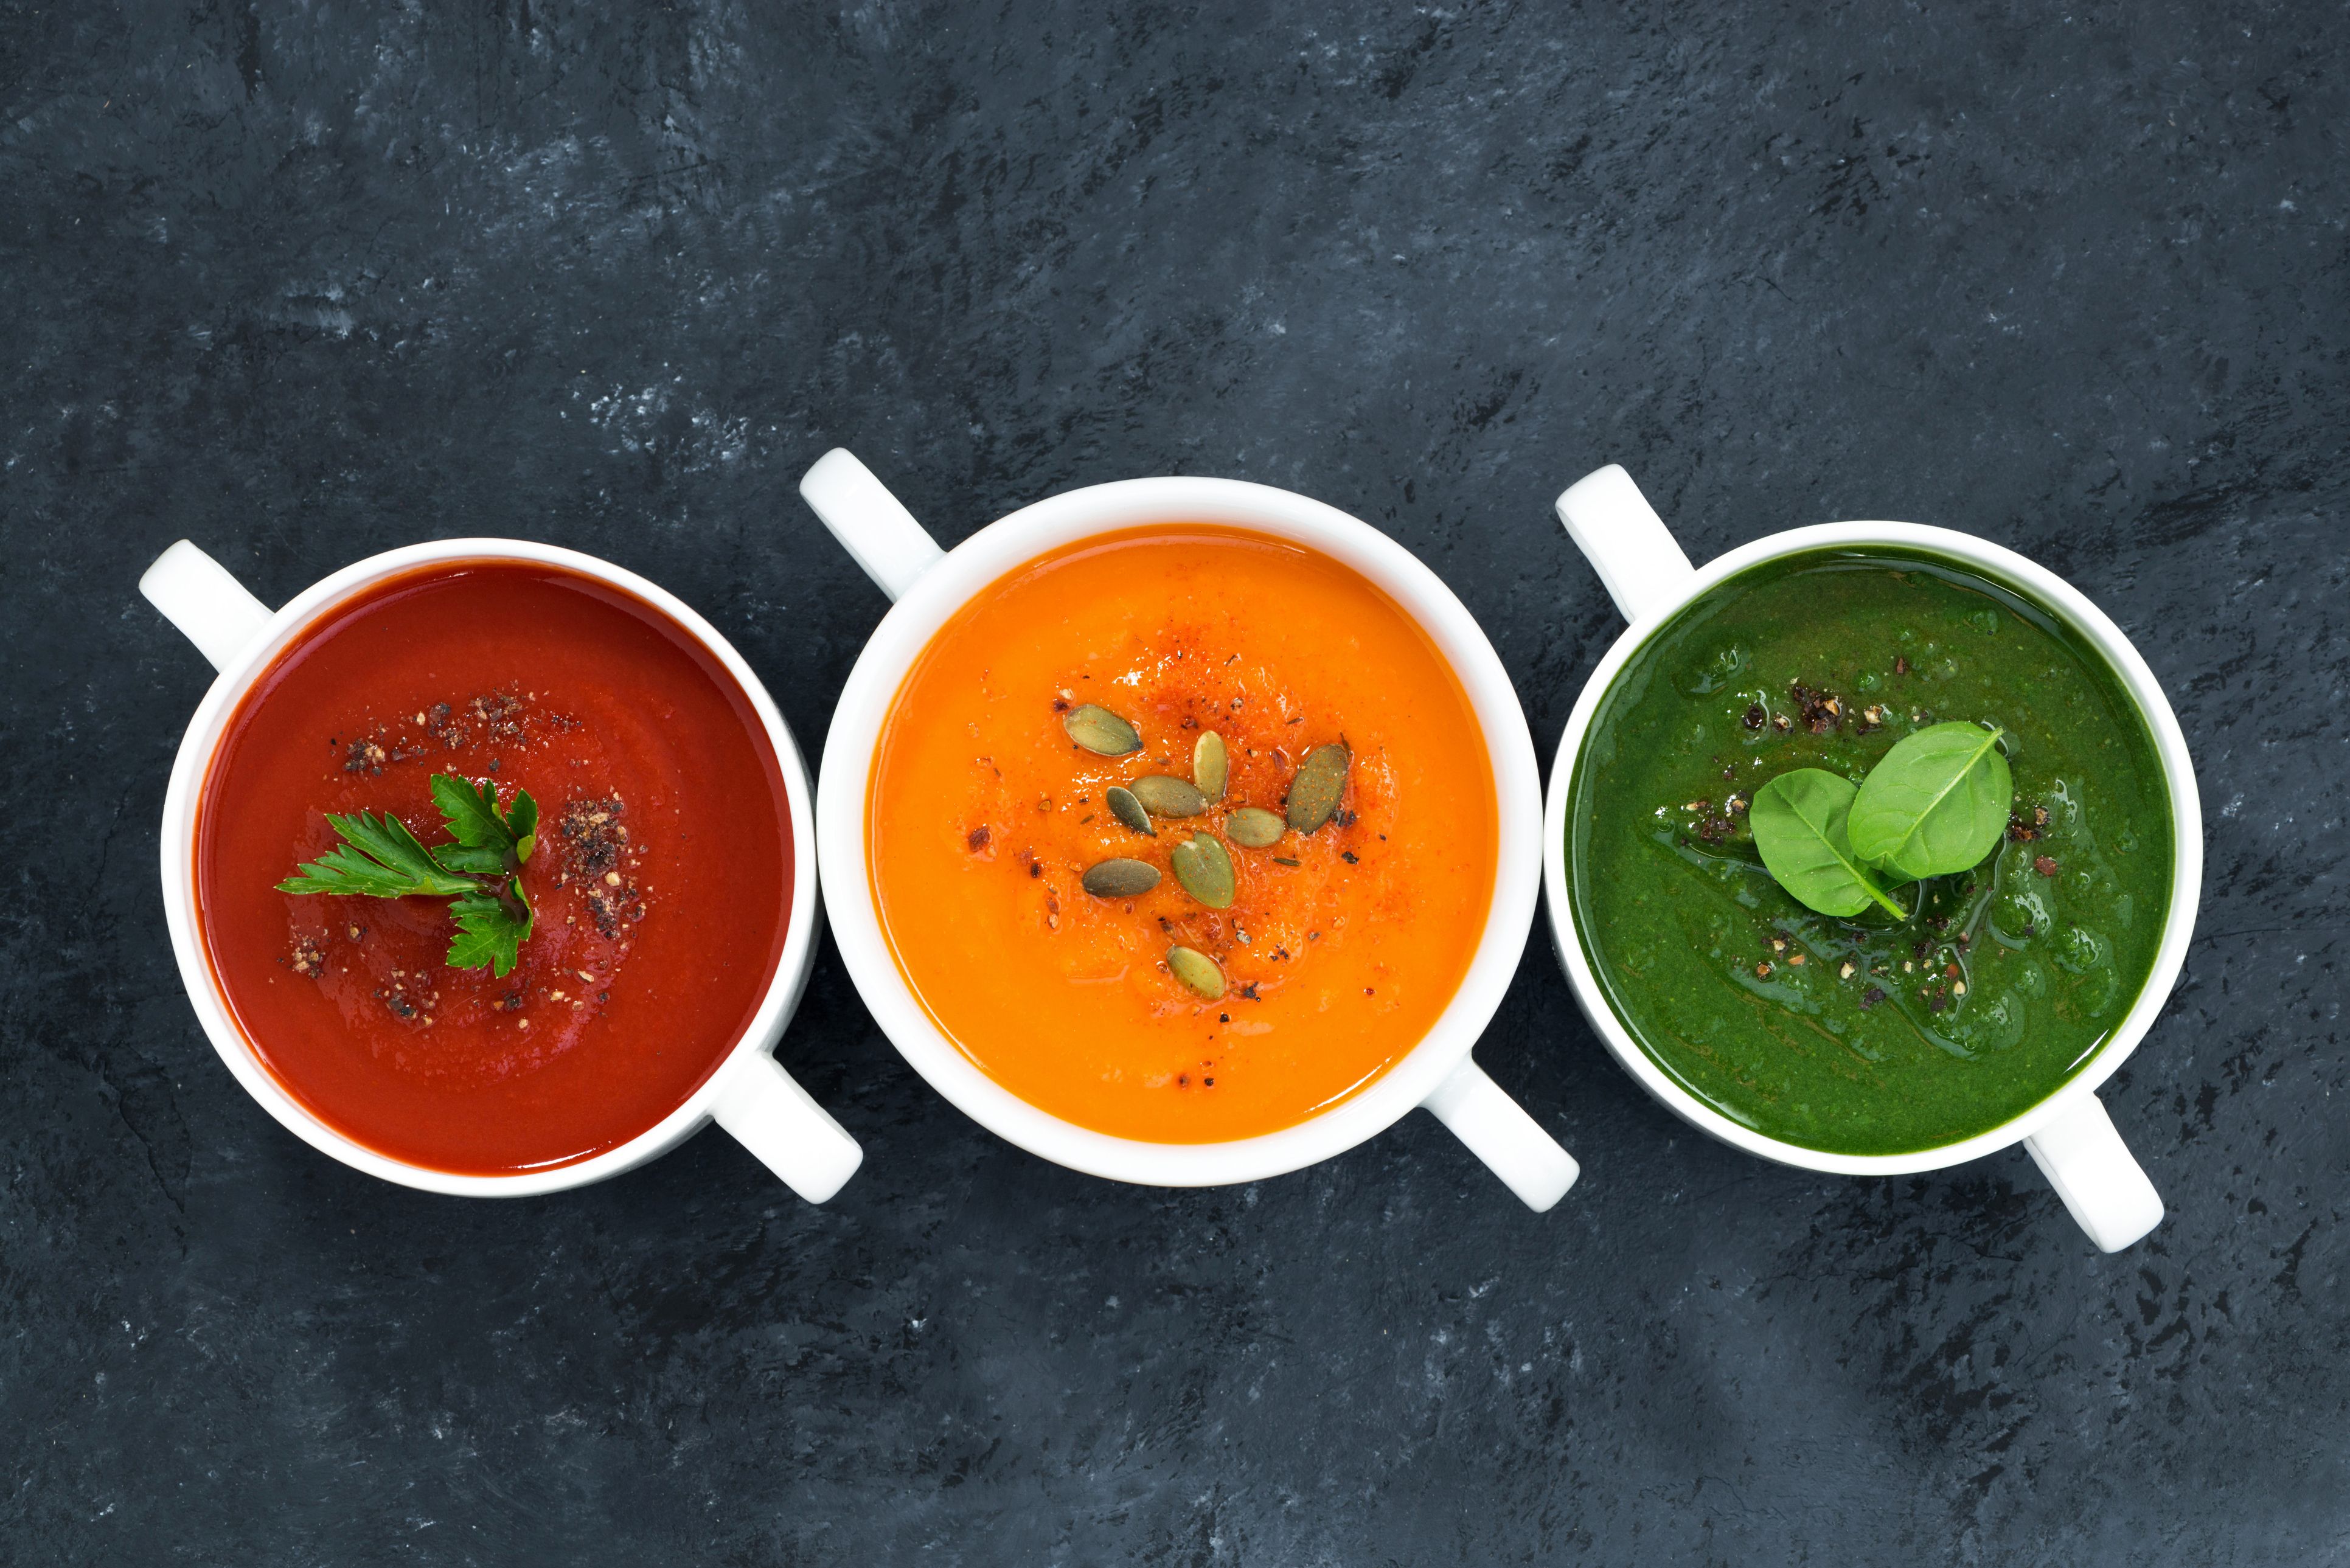 8 Bone Broth Benefits And How To Make It, According To RDs